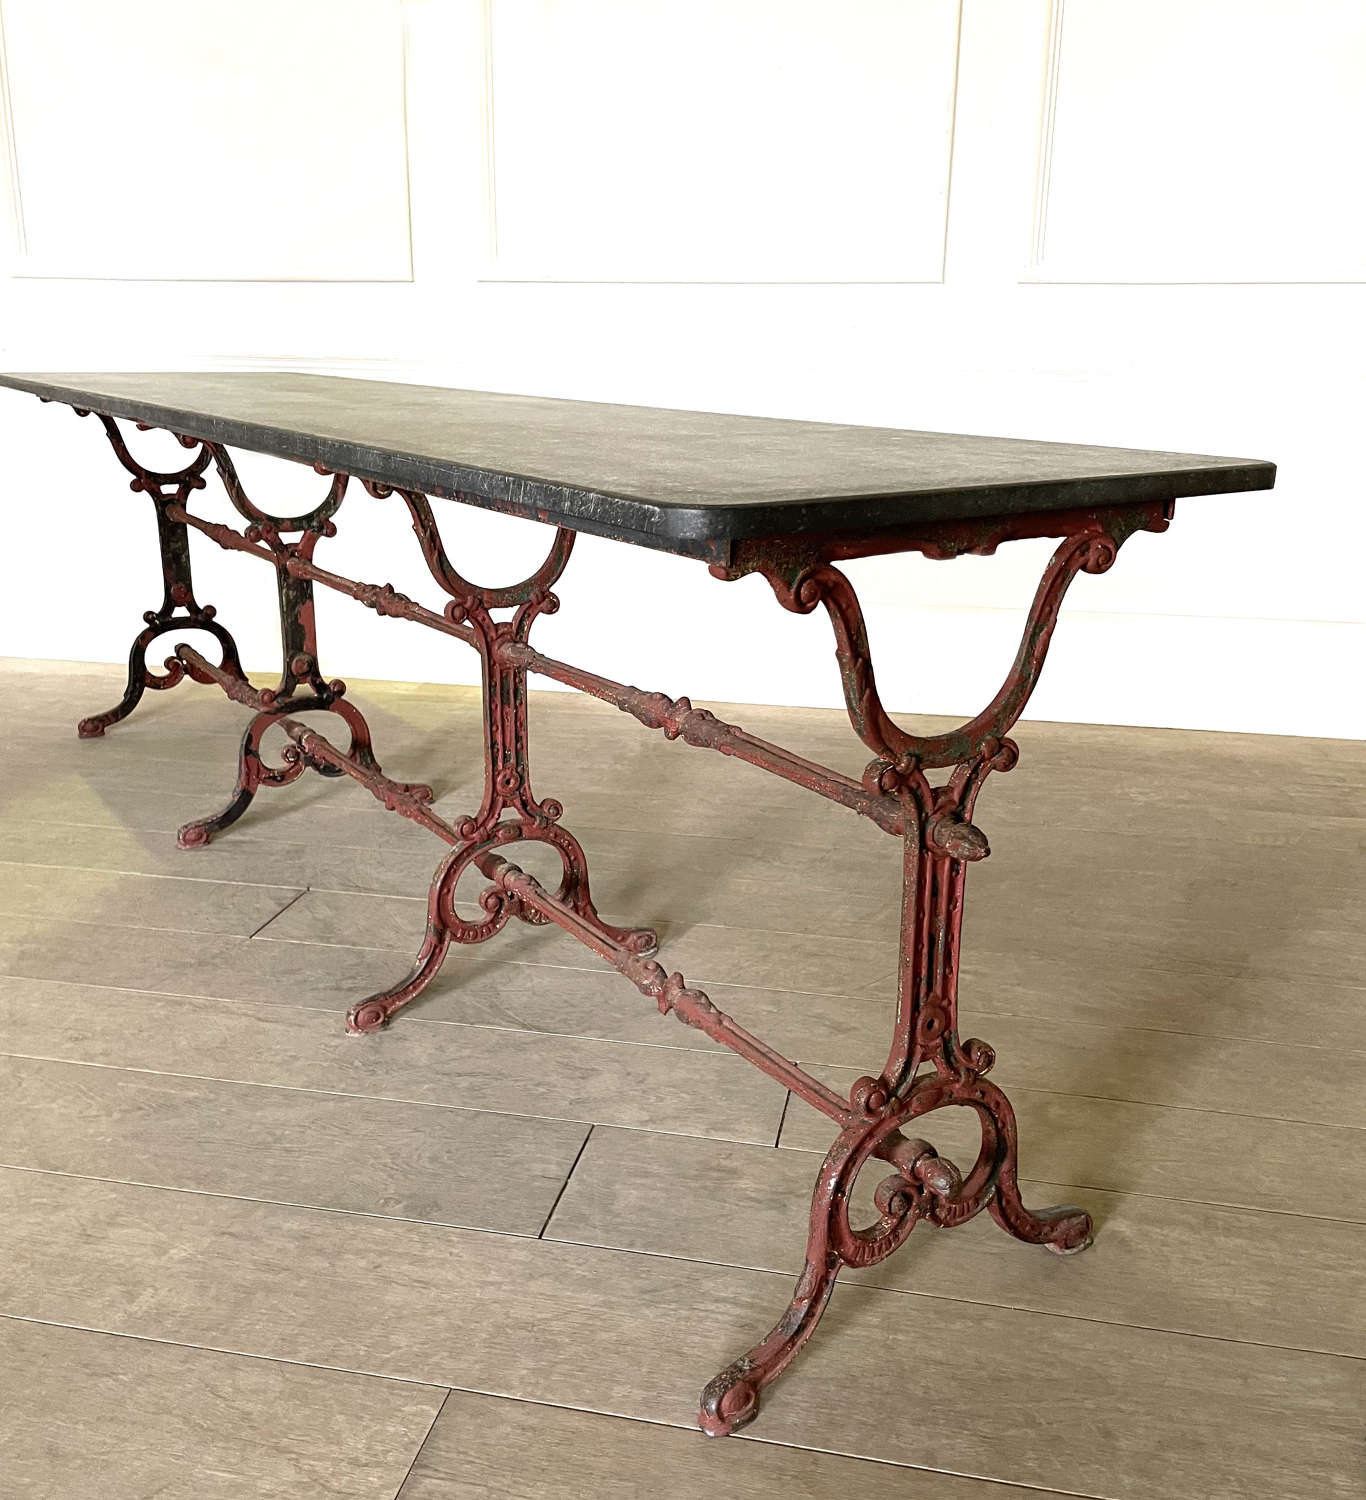 19th century French Cast Iron Table with Marble top - circa 1880